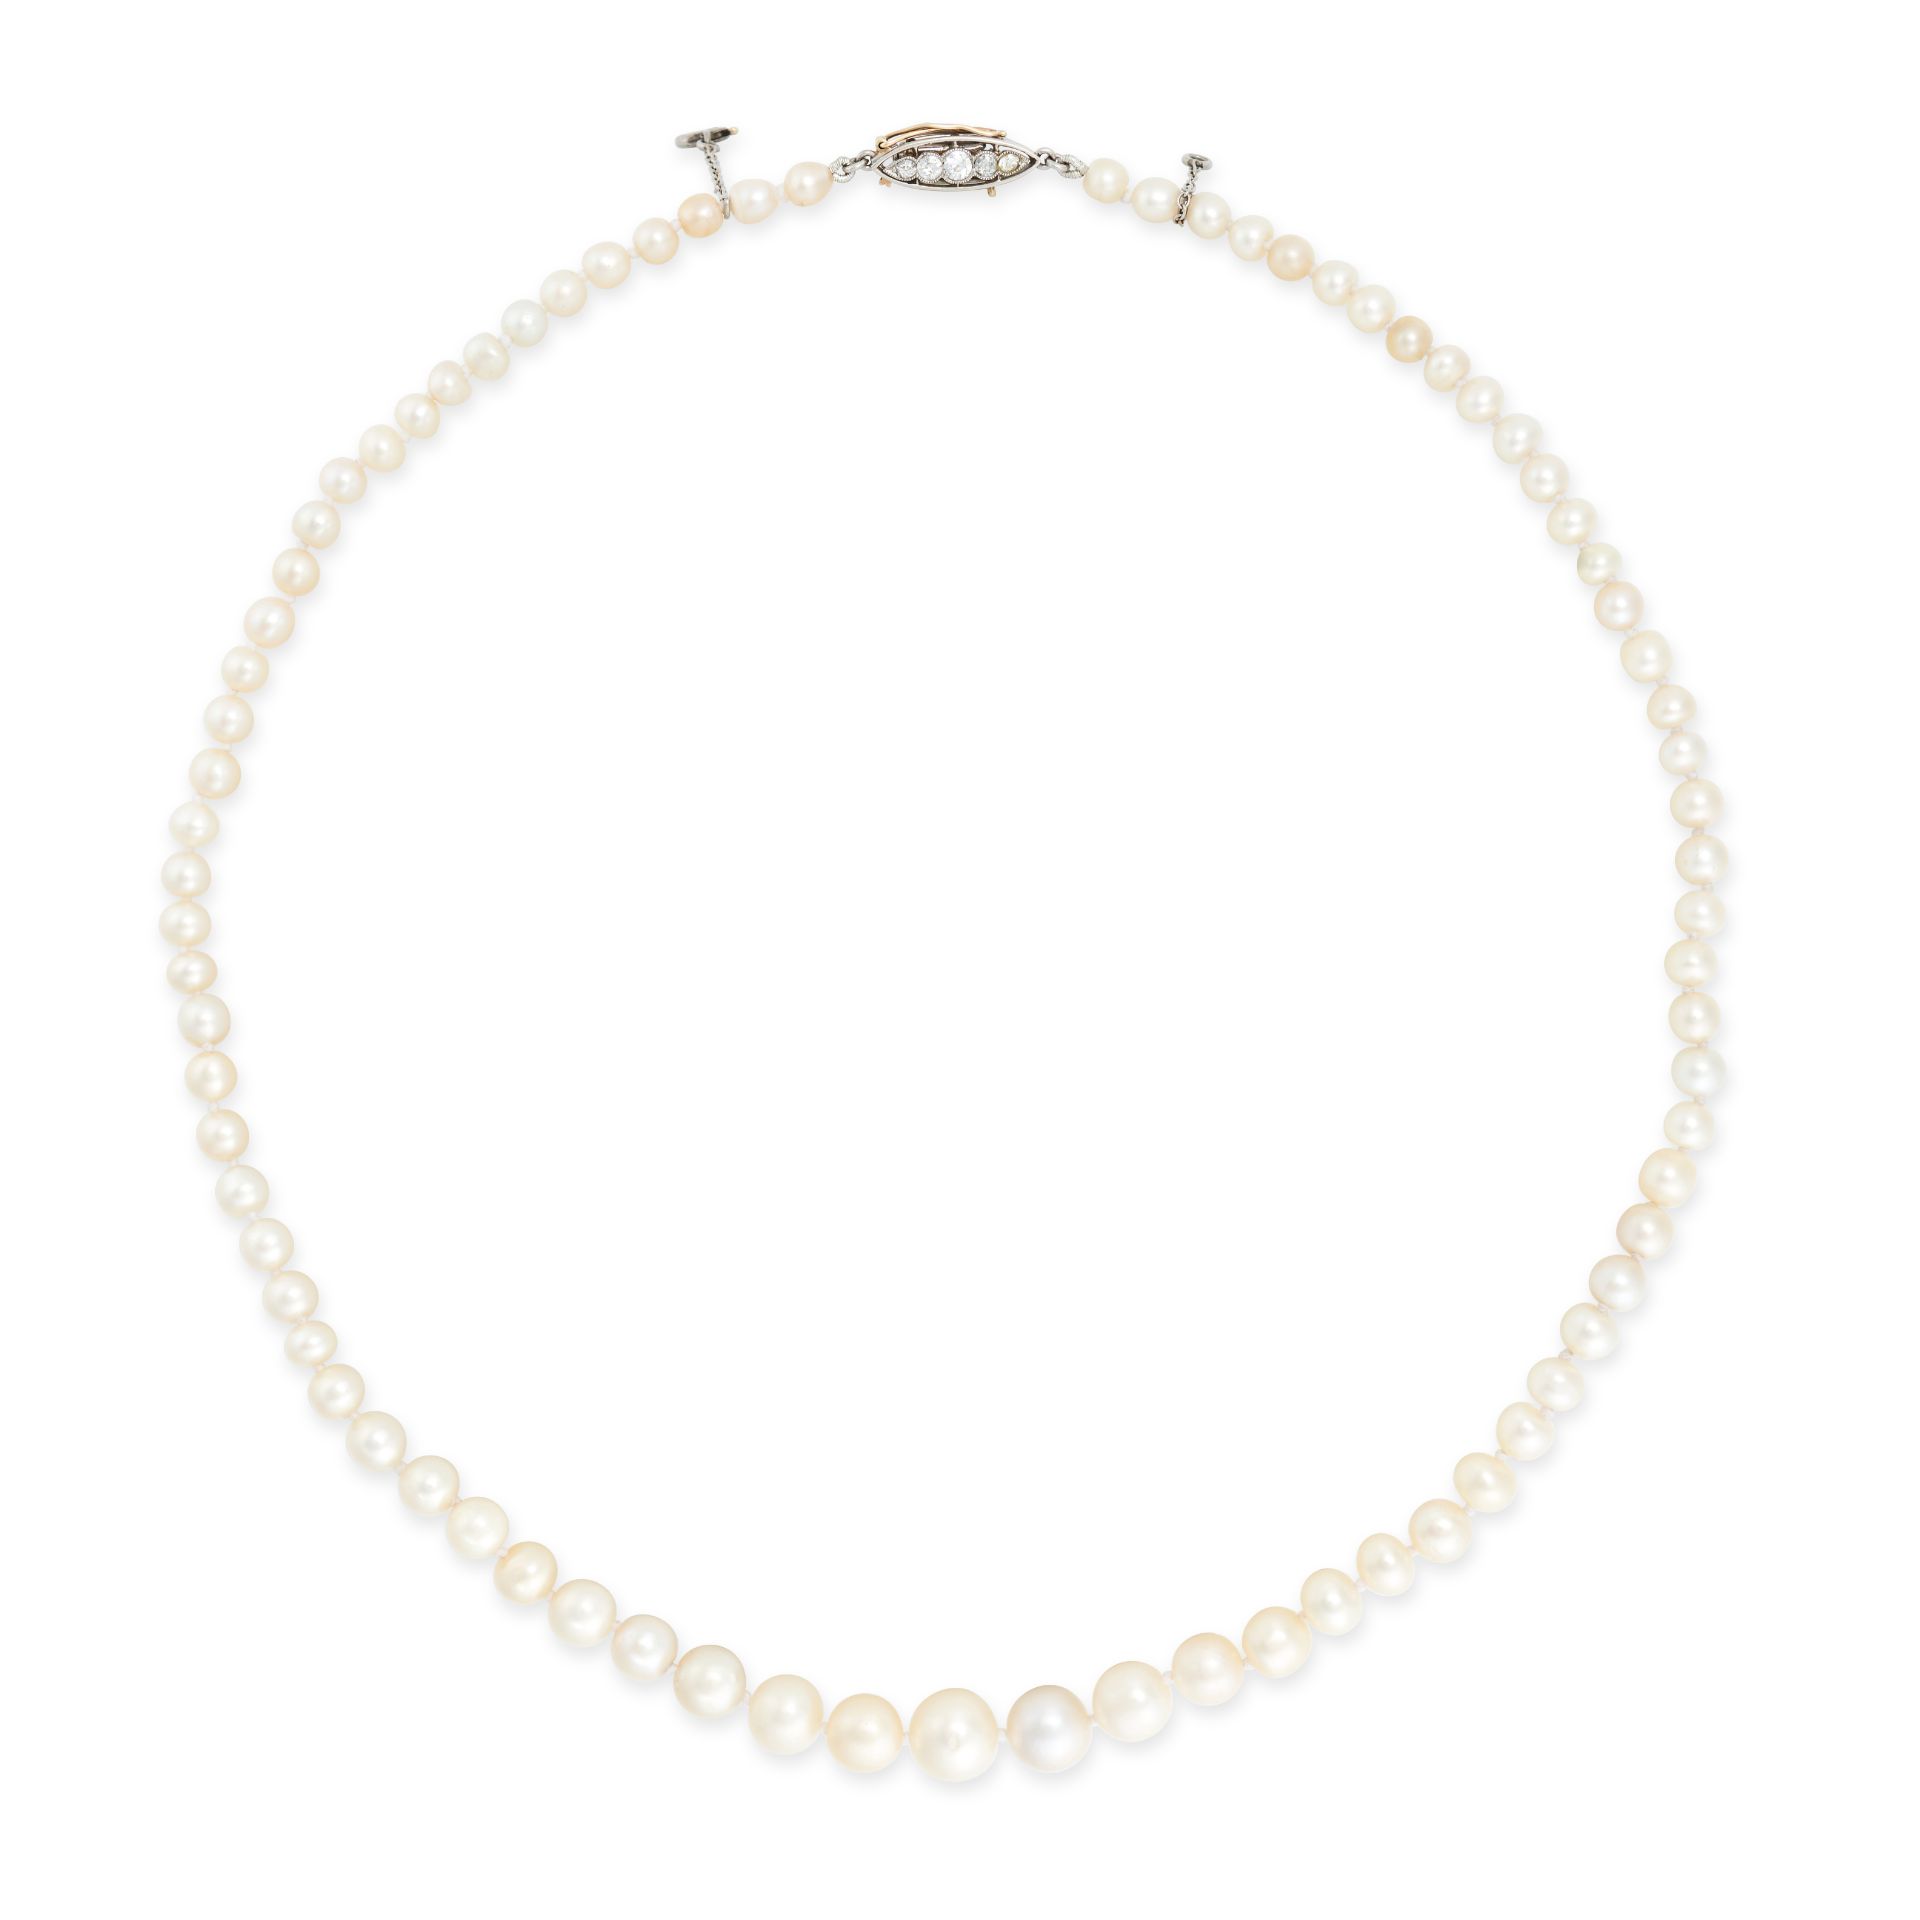 A FINE NATURAL SALTWATER PEARL AND DIAMOND NECKLACE in platinum and yellow gold, comprising a sin...